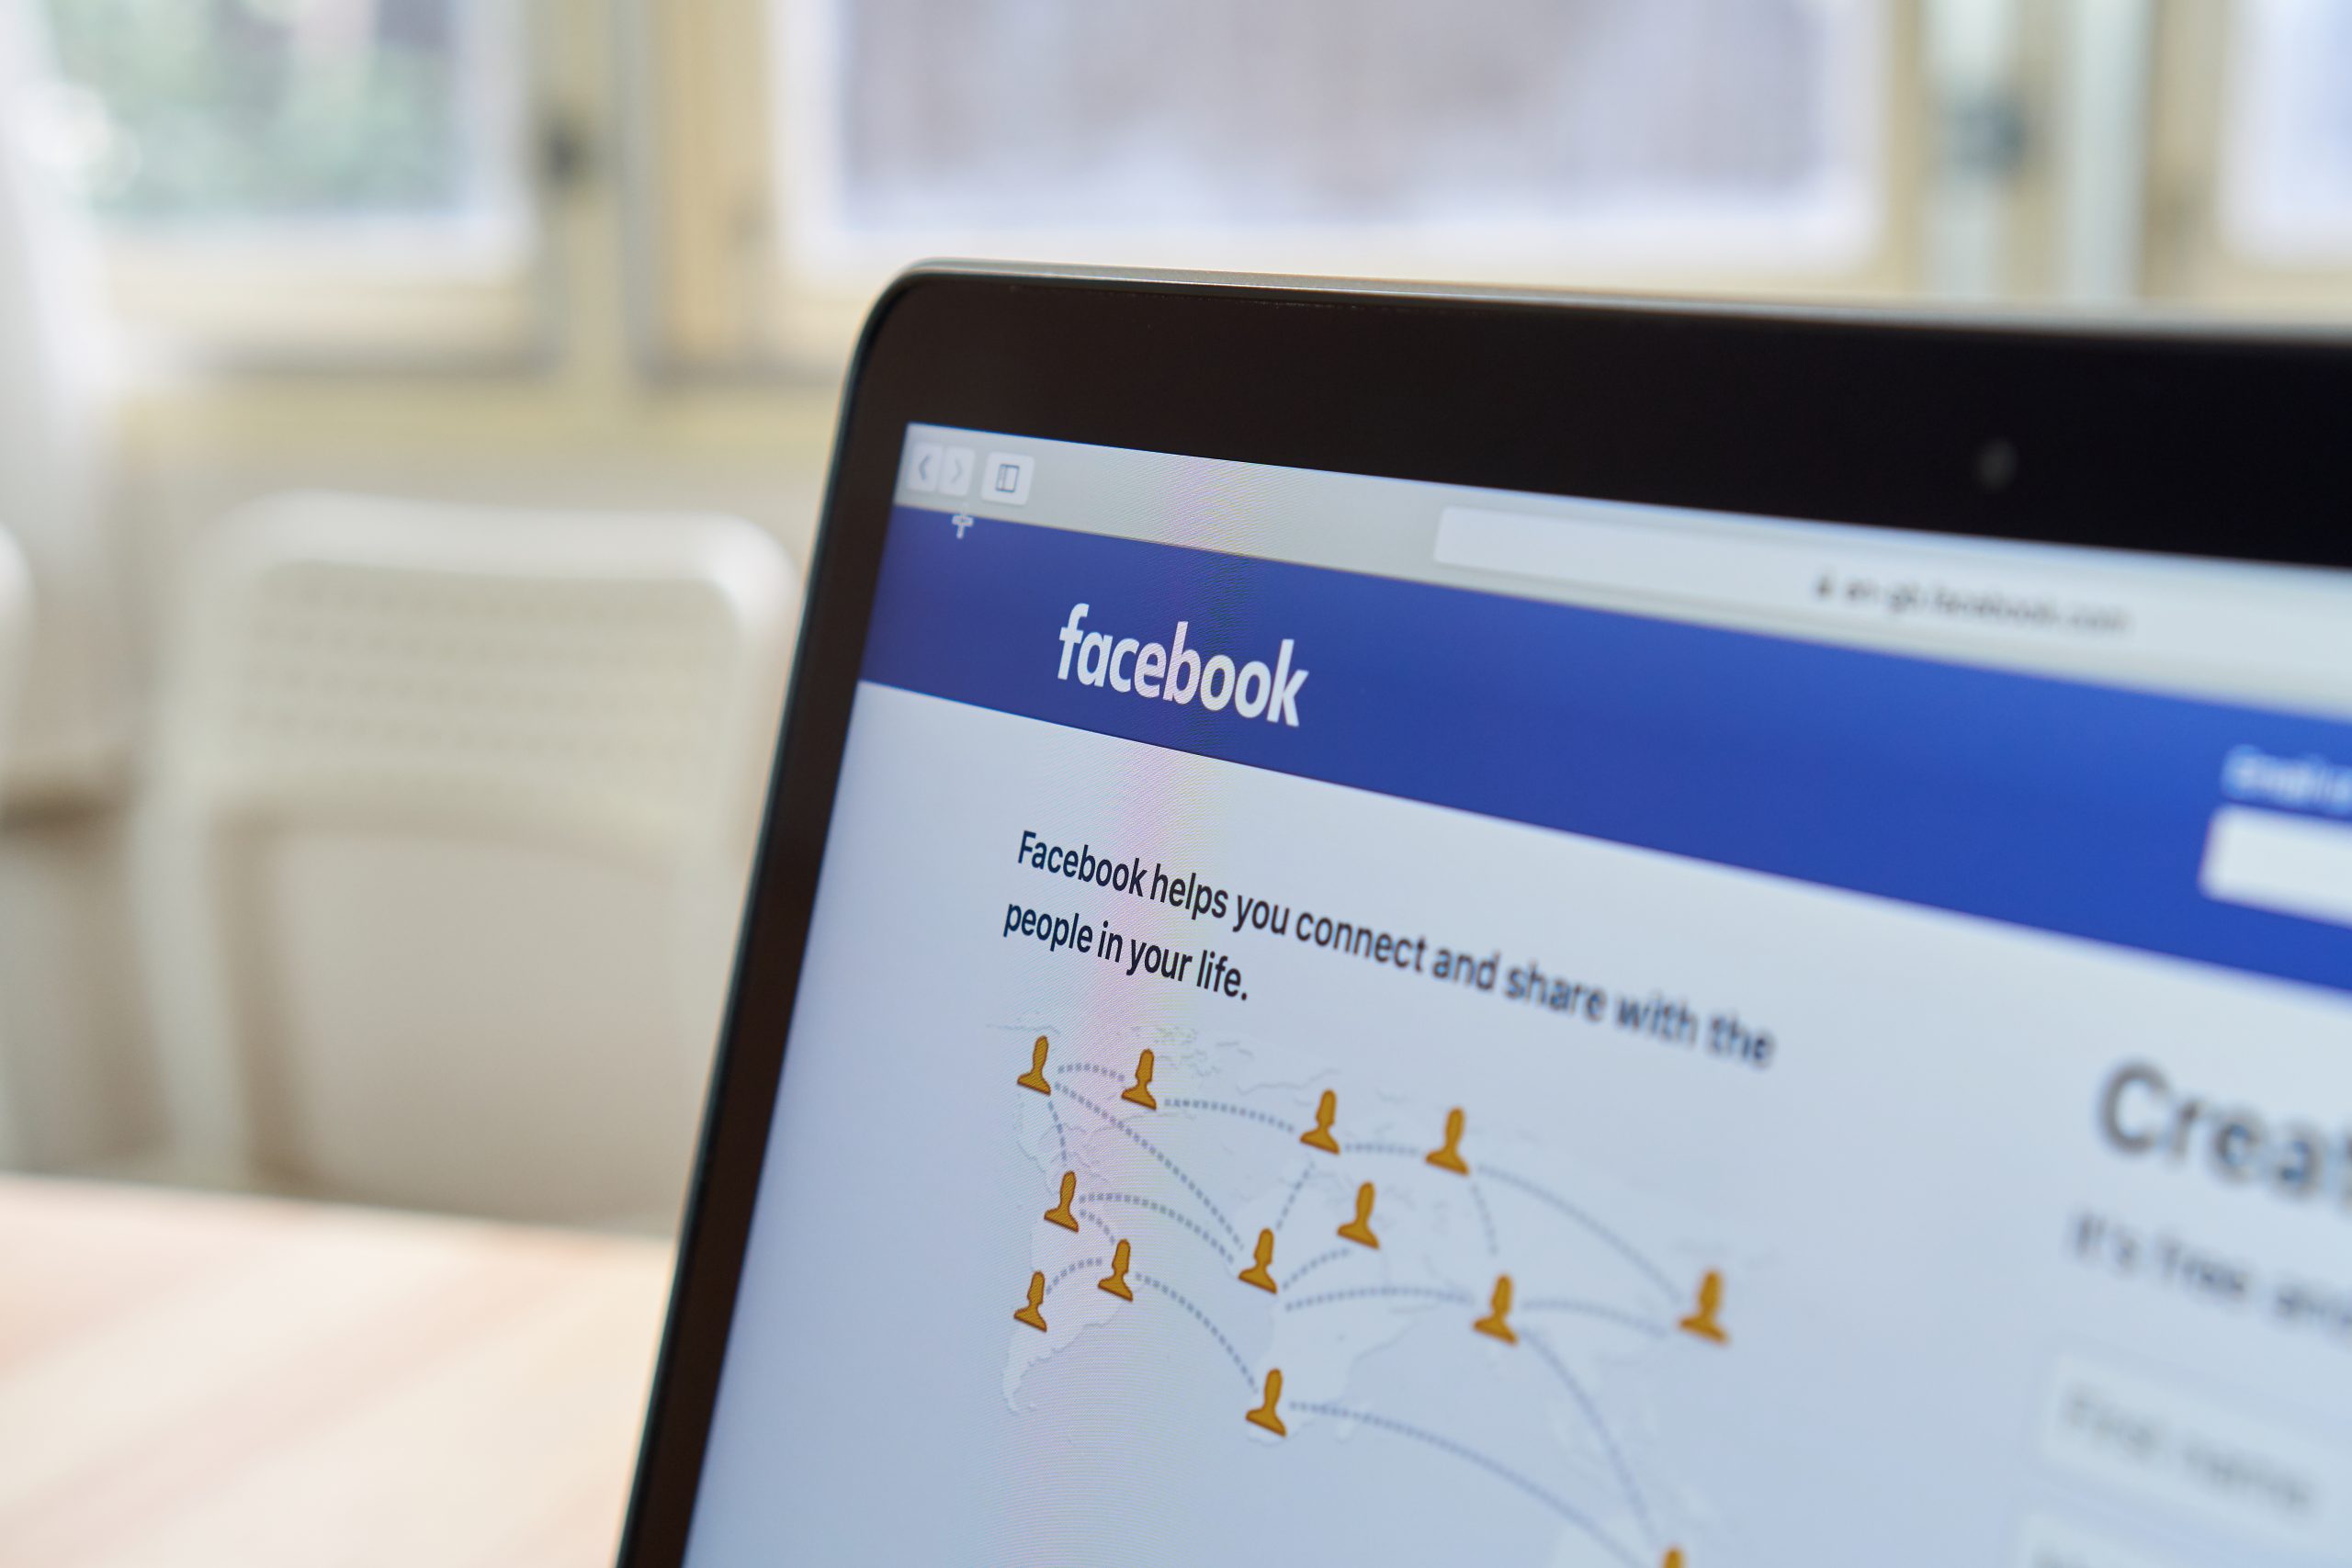 Ways to build a community through Facebook groups